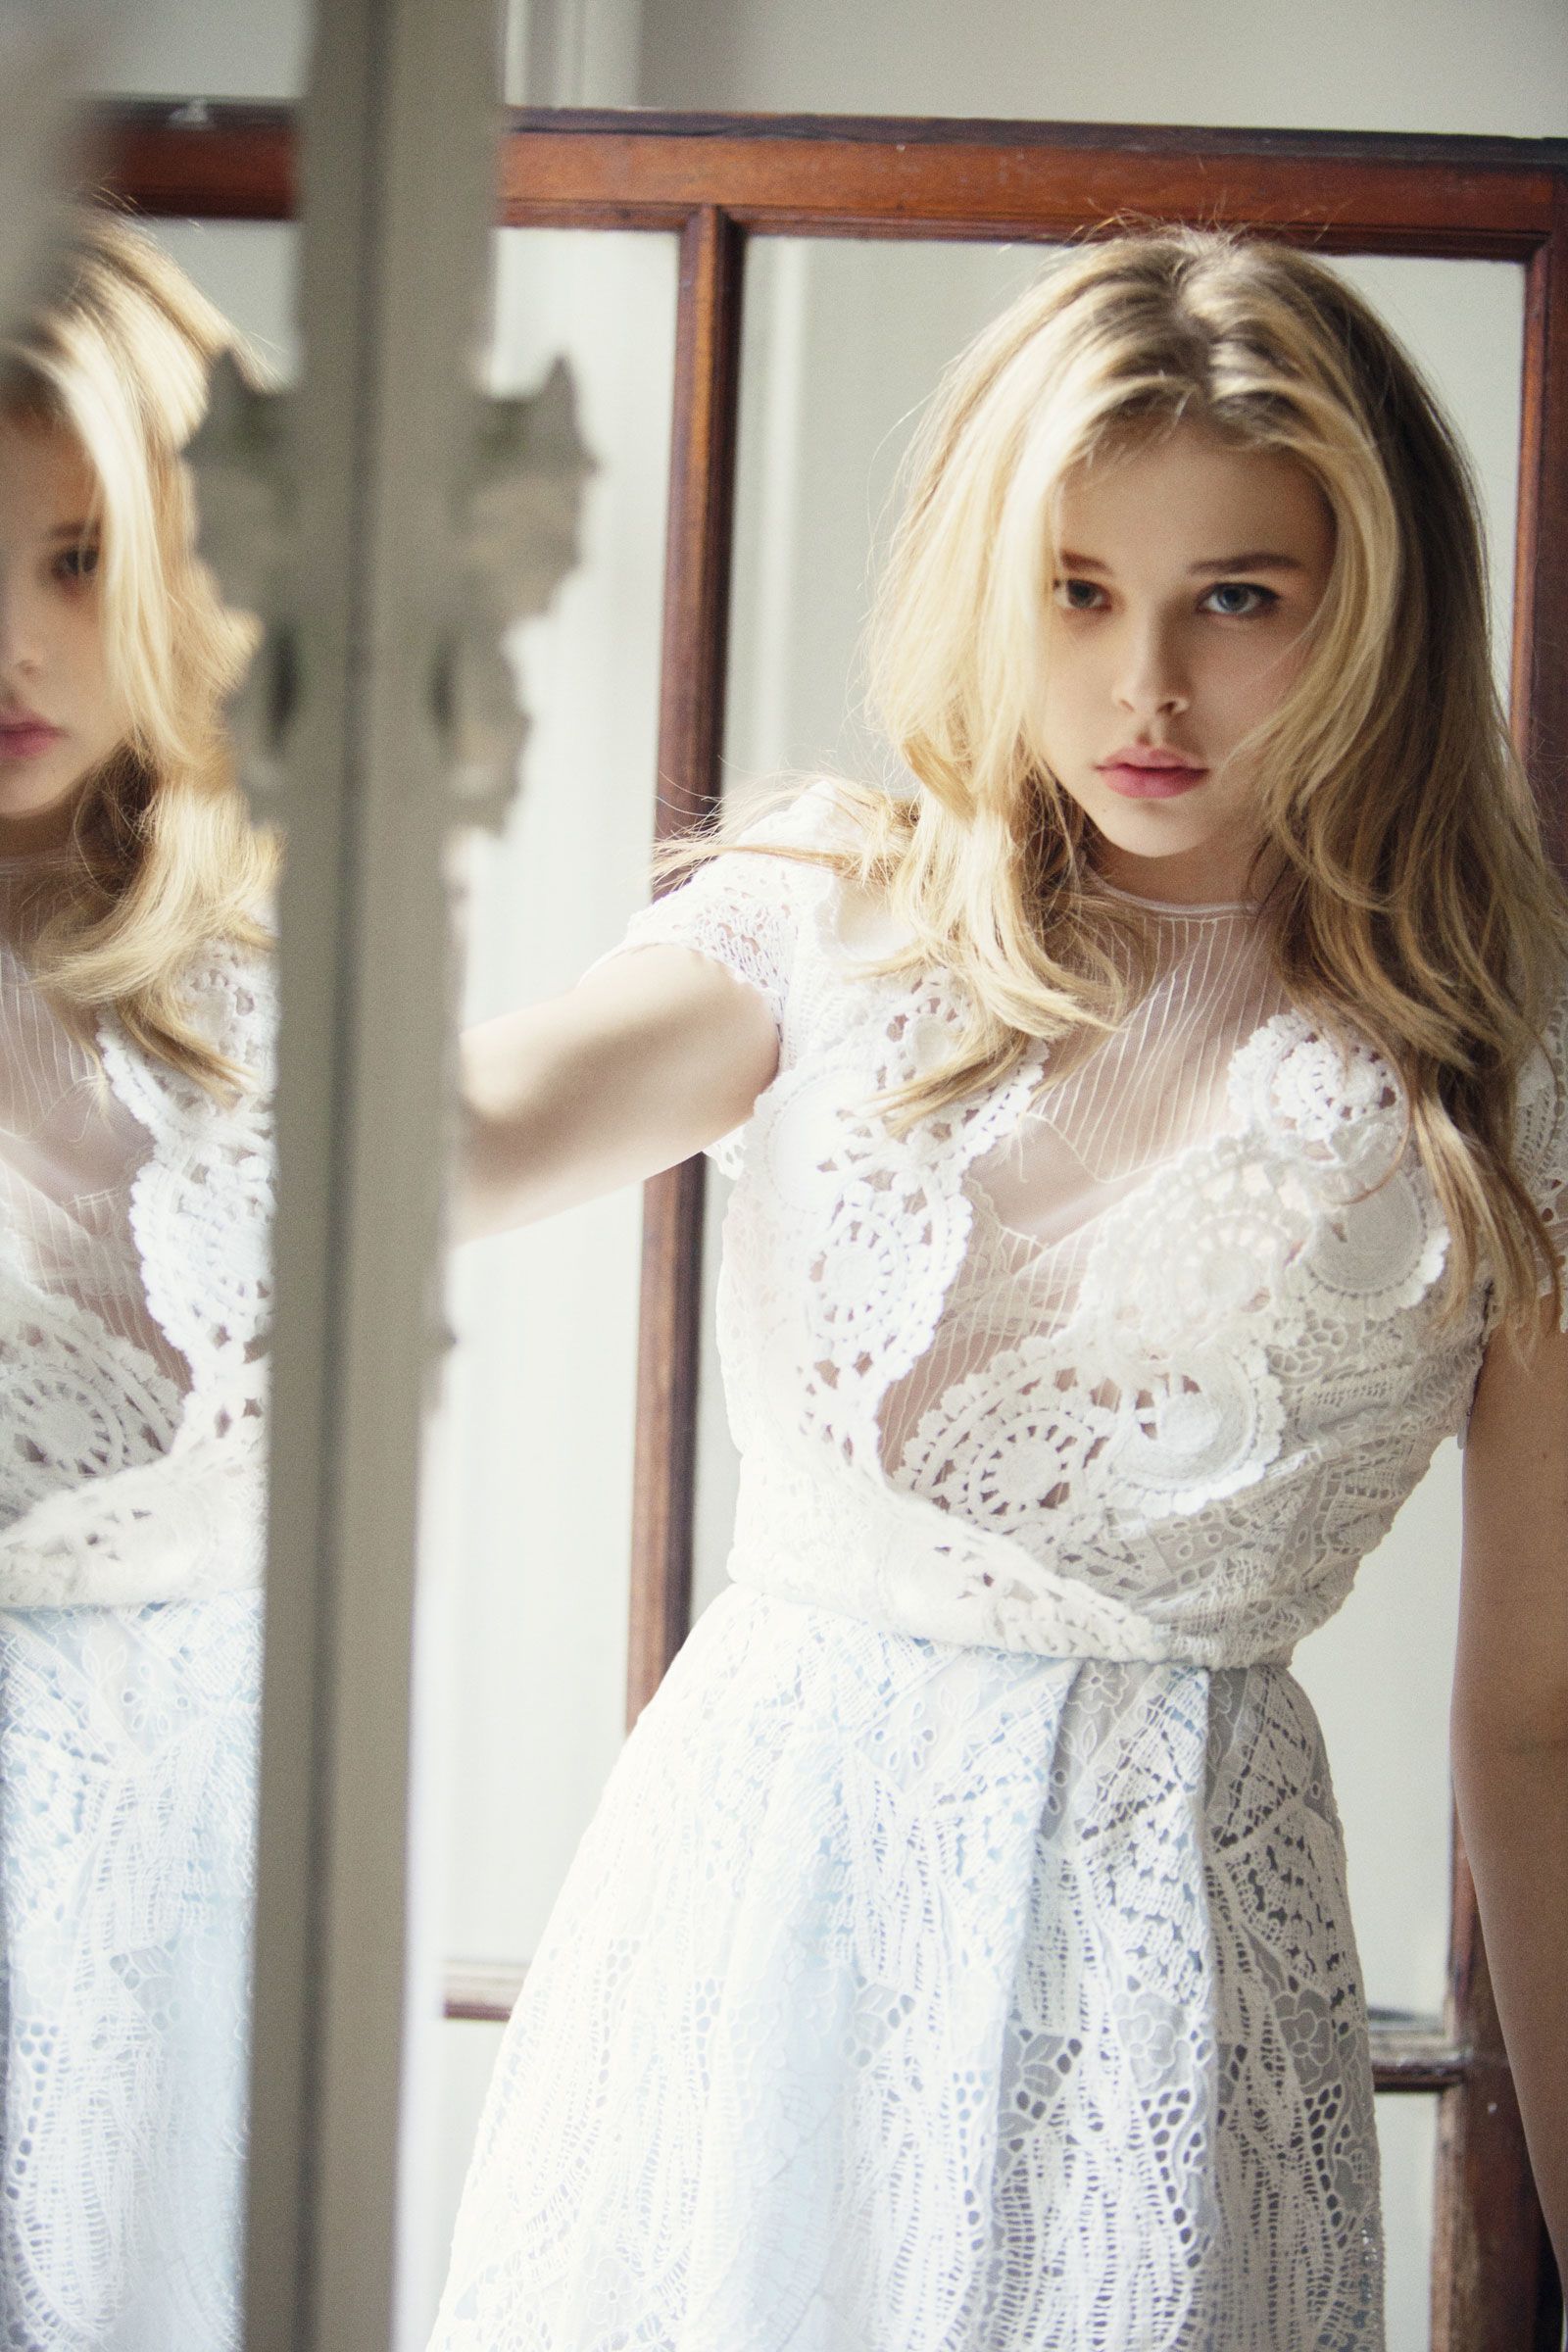 ChloГ« Grace Moretz Hollywood Young Actress Wallpapers